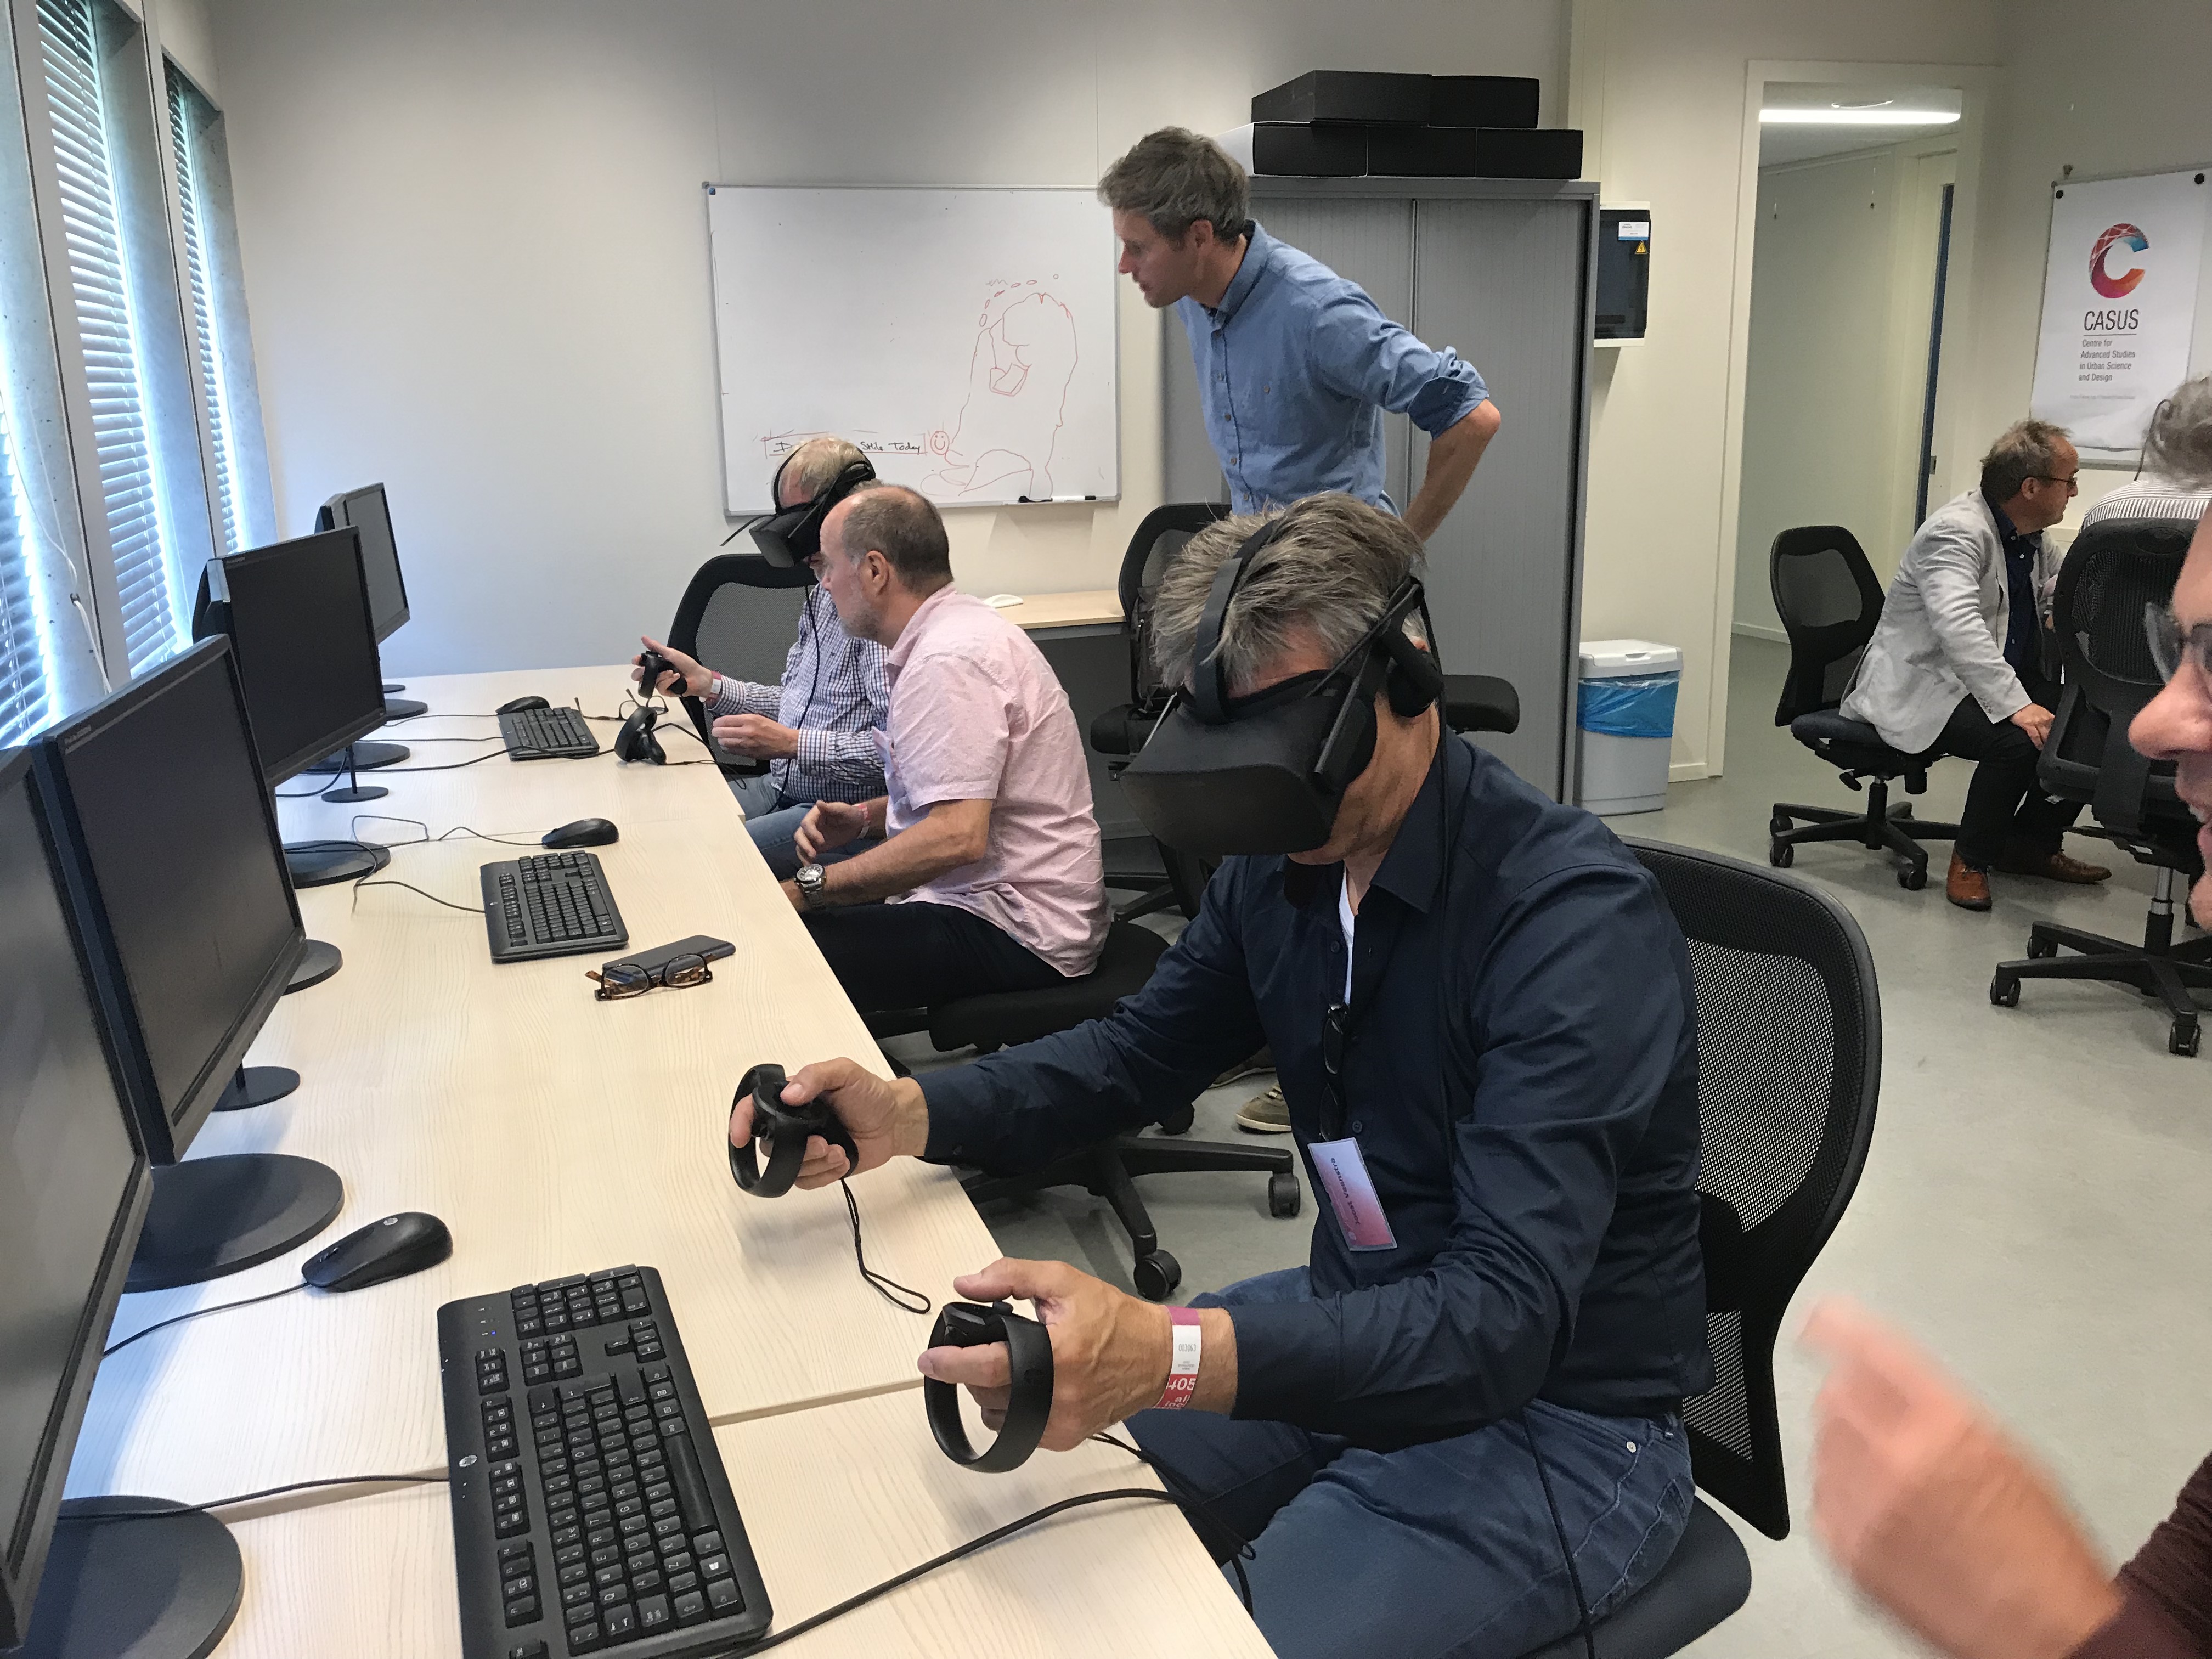 Alumni discovering the possibilities of virtual reality during the 2019 lustrum of the University of Groningen